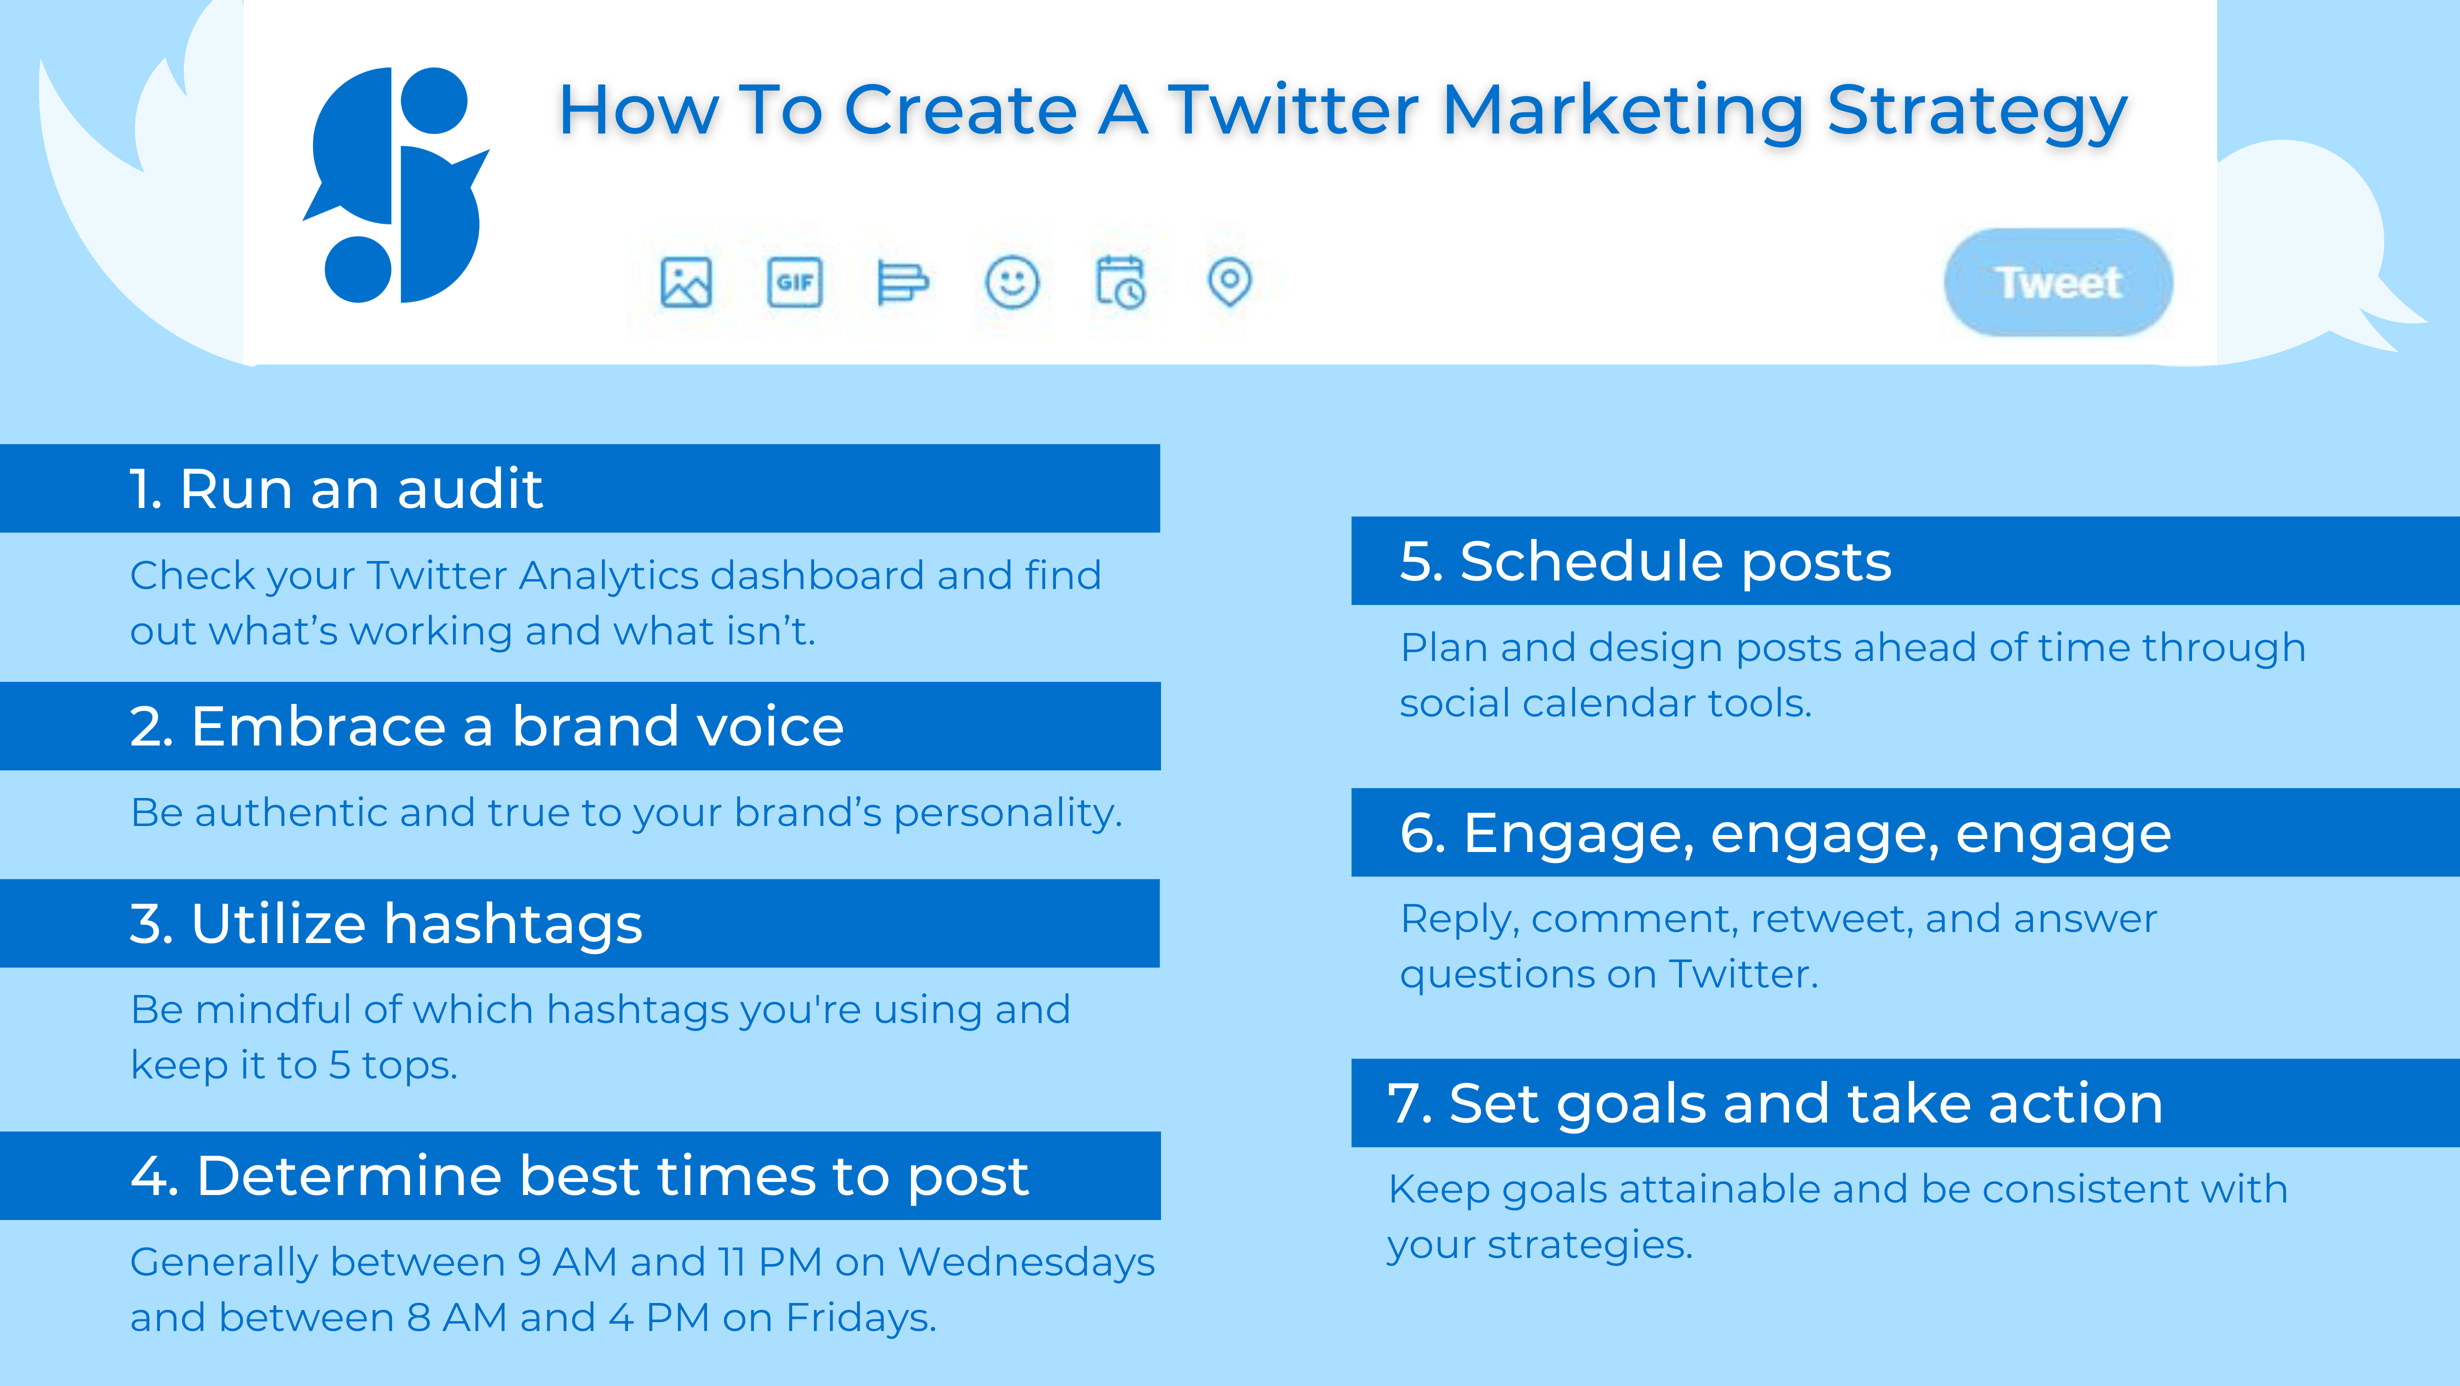 Twitter Marketing Made Easy The AllinOne Guide For Your Business